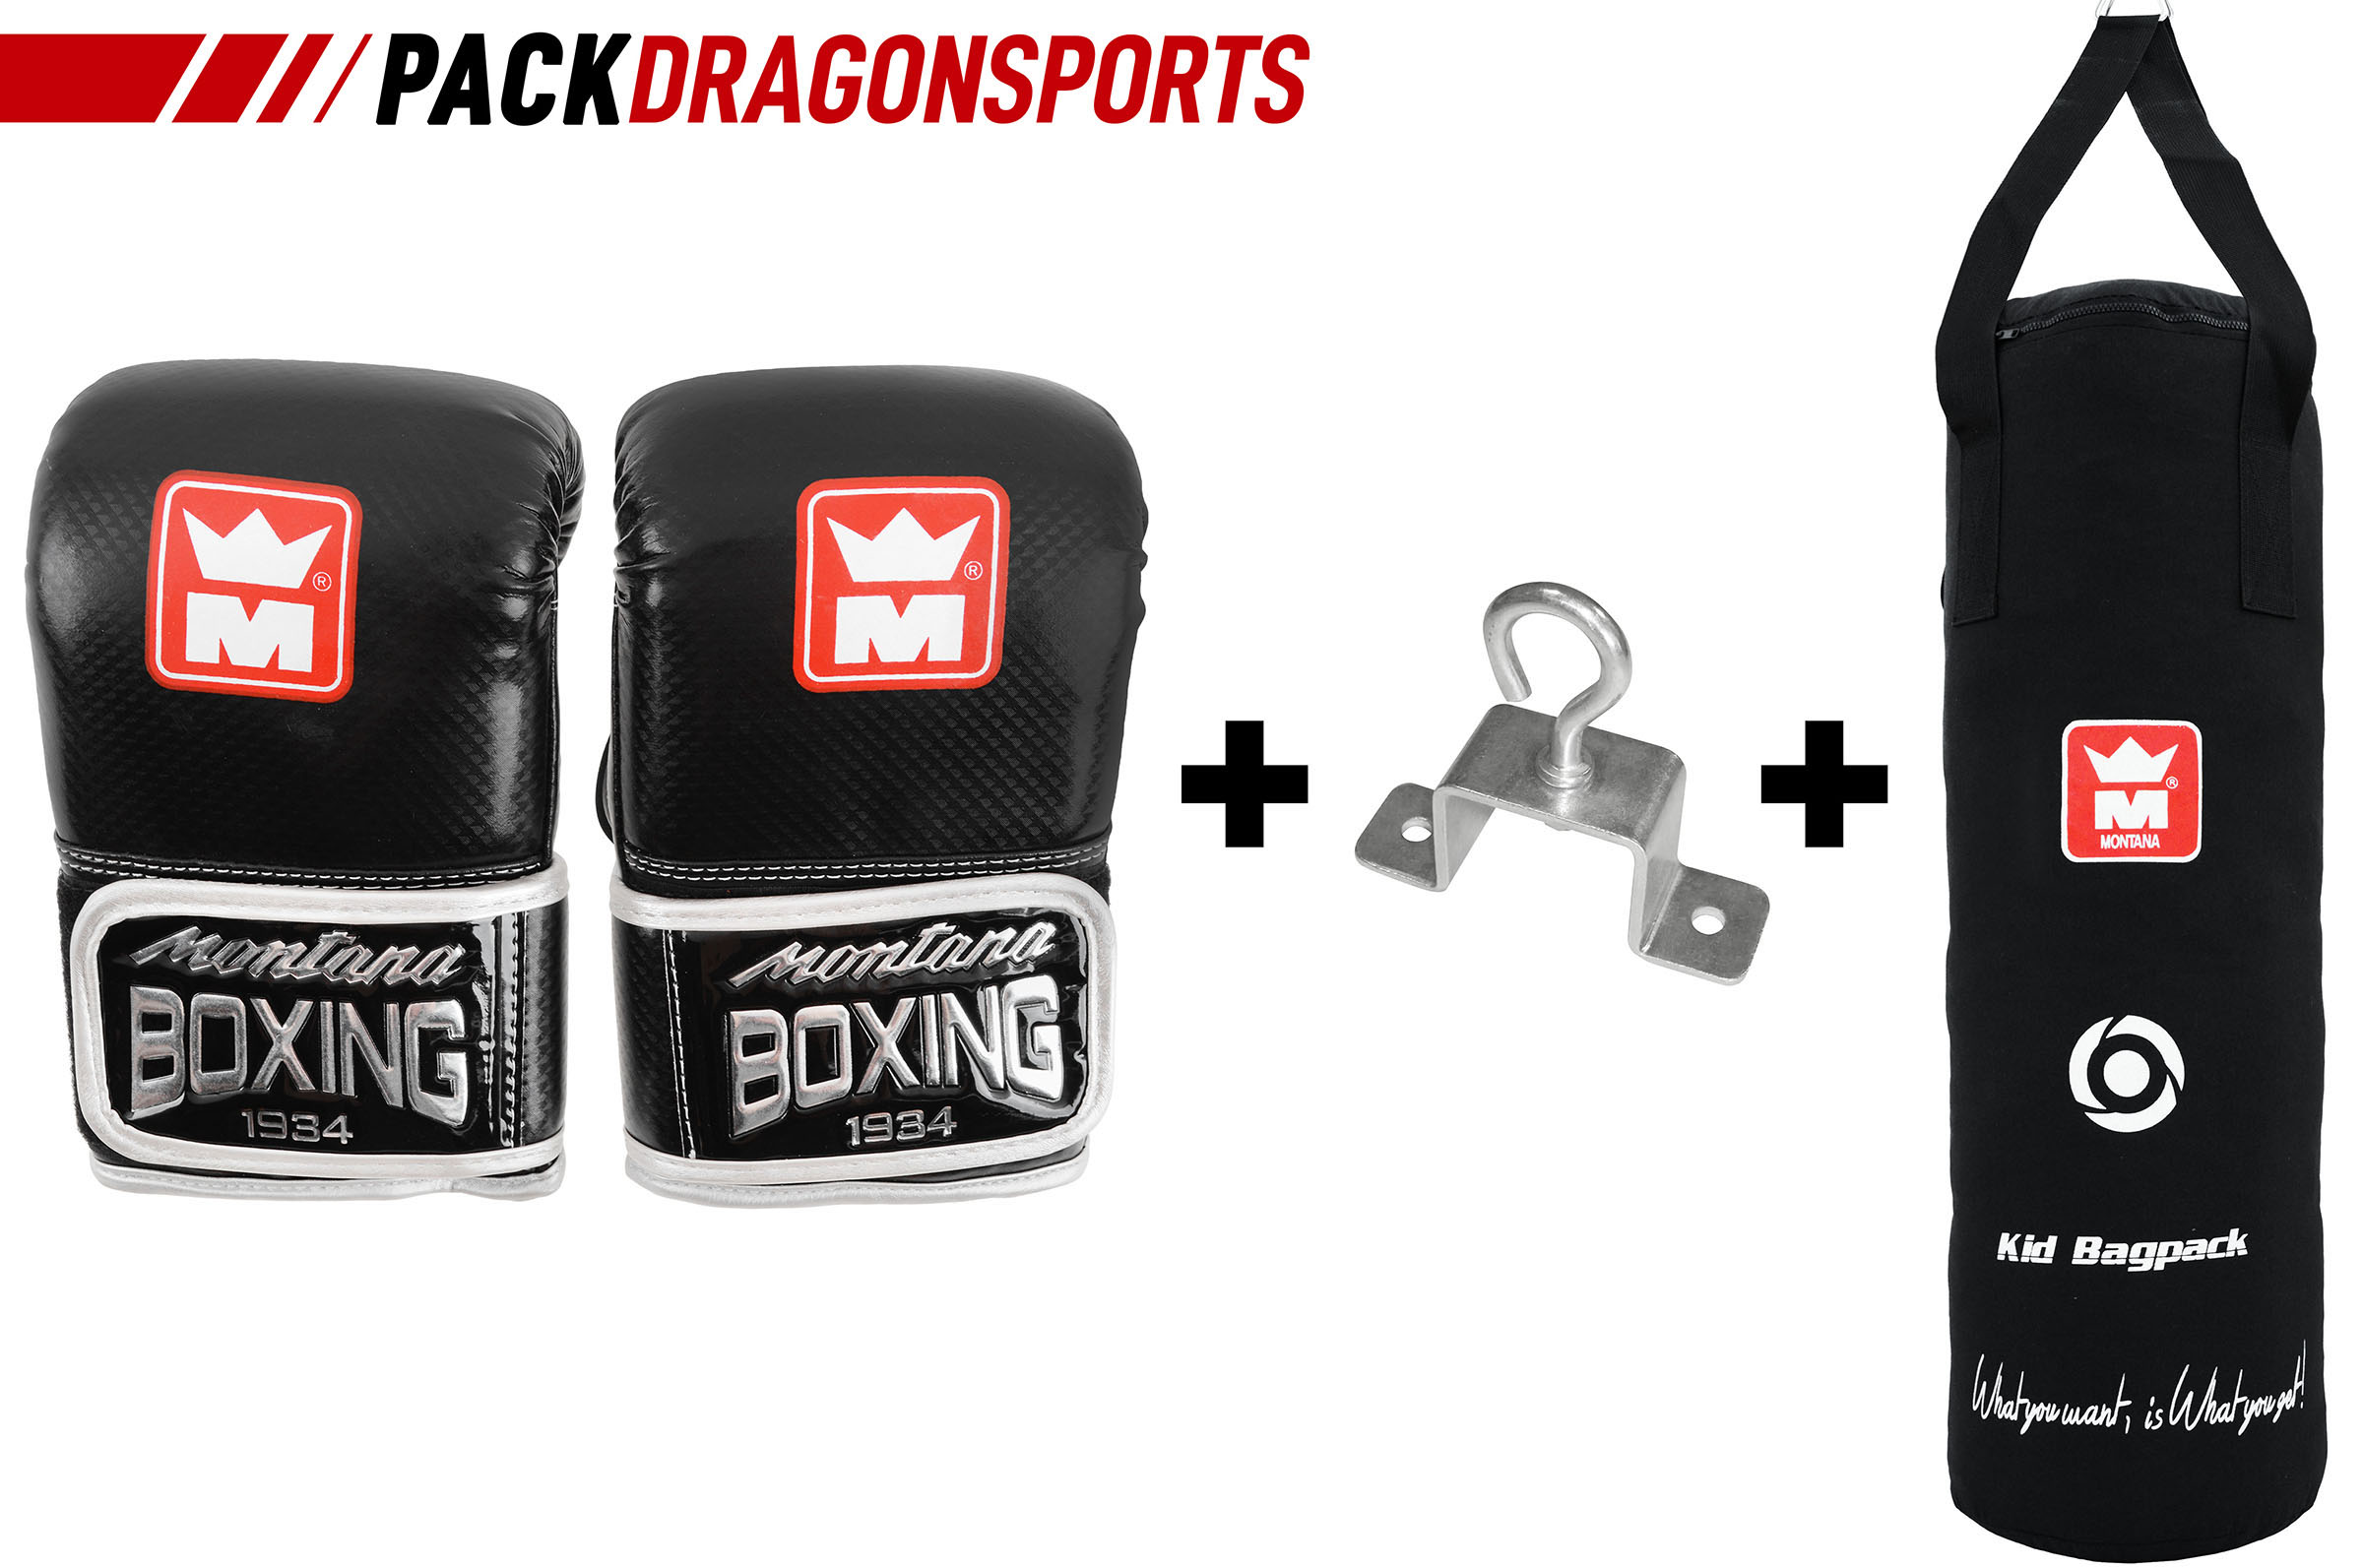 Gloves & punching bag  Introduction to boxing, Montana 